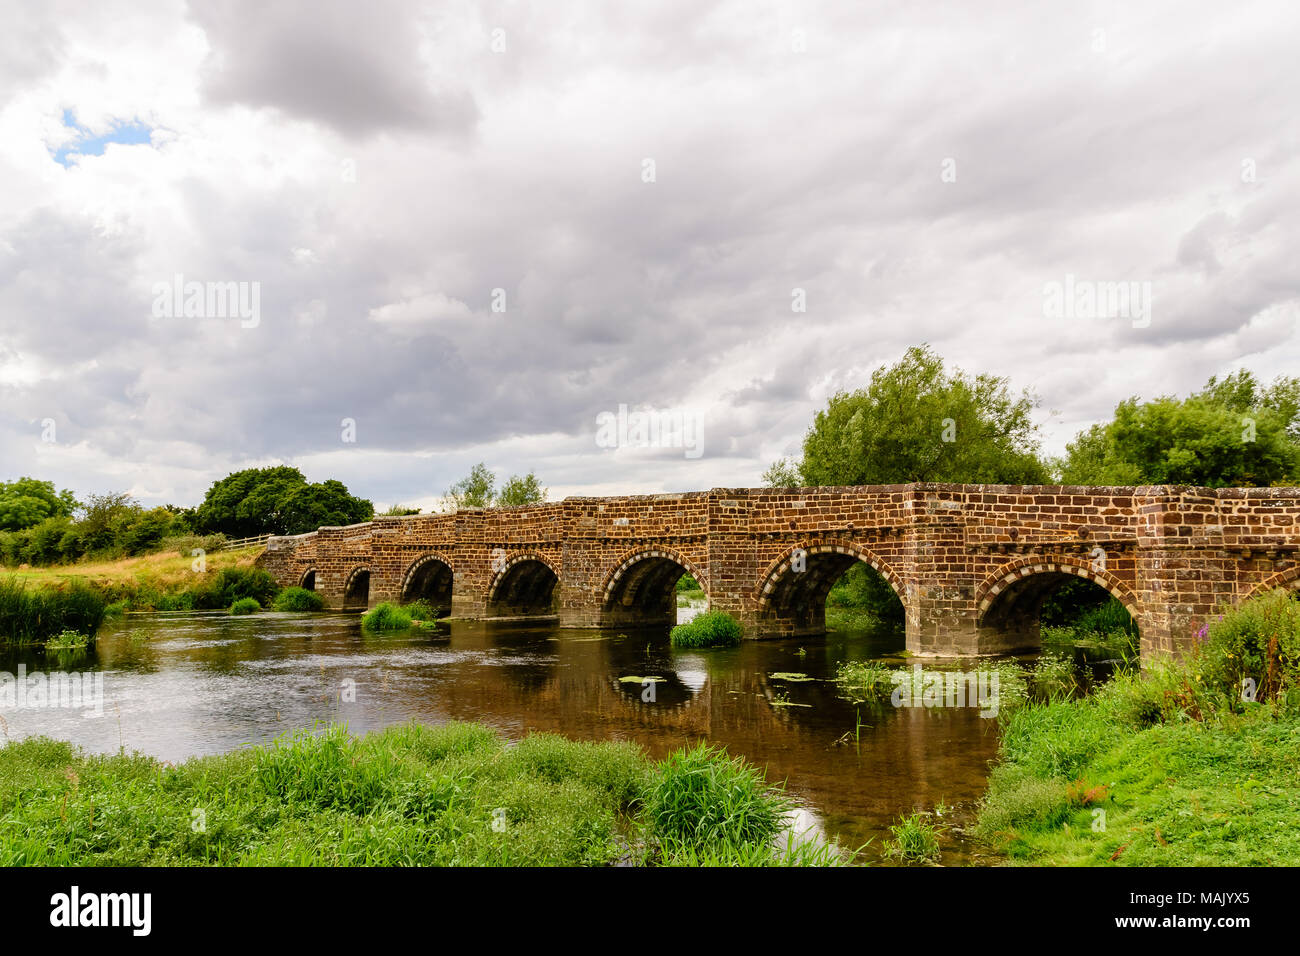 The Norman White Mill Bridge over the River Stour in Dorset, England.  Probably the oldest bridge to cross the Stour. Stock Photo